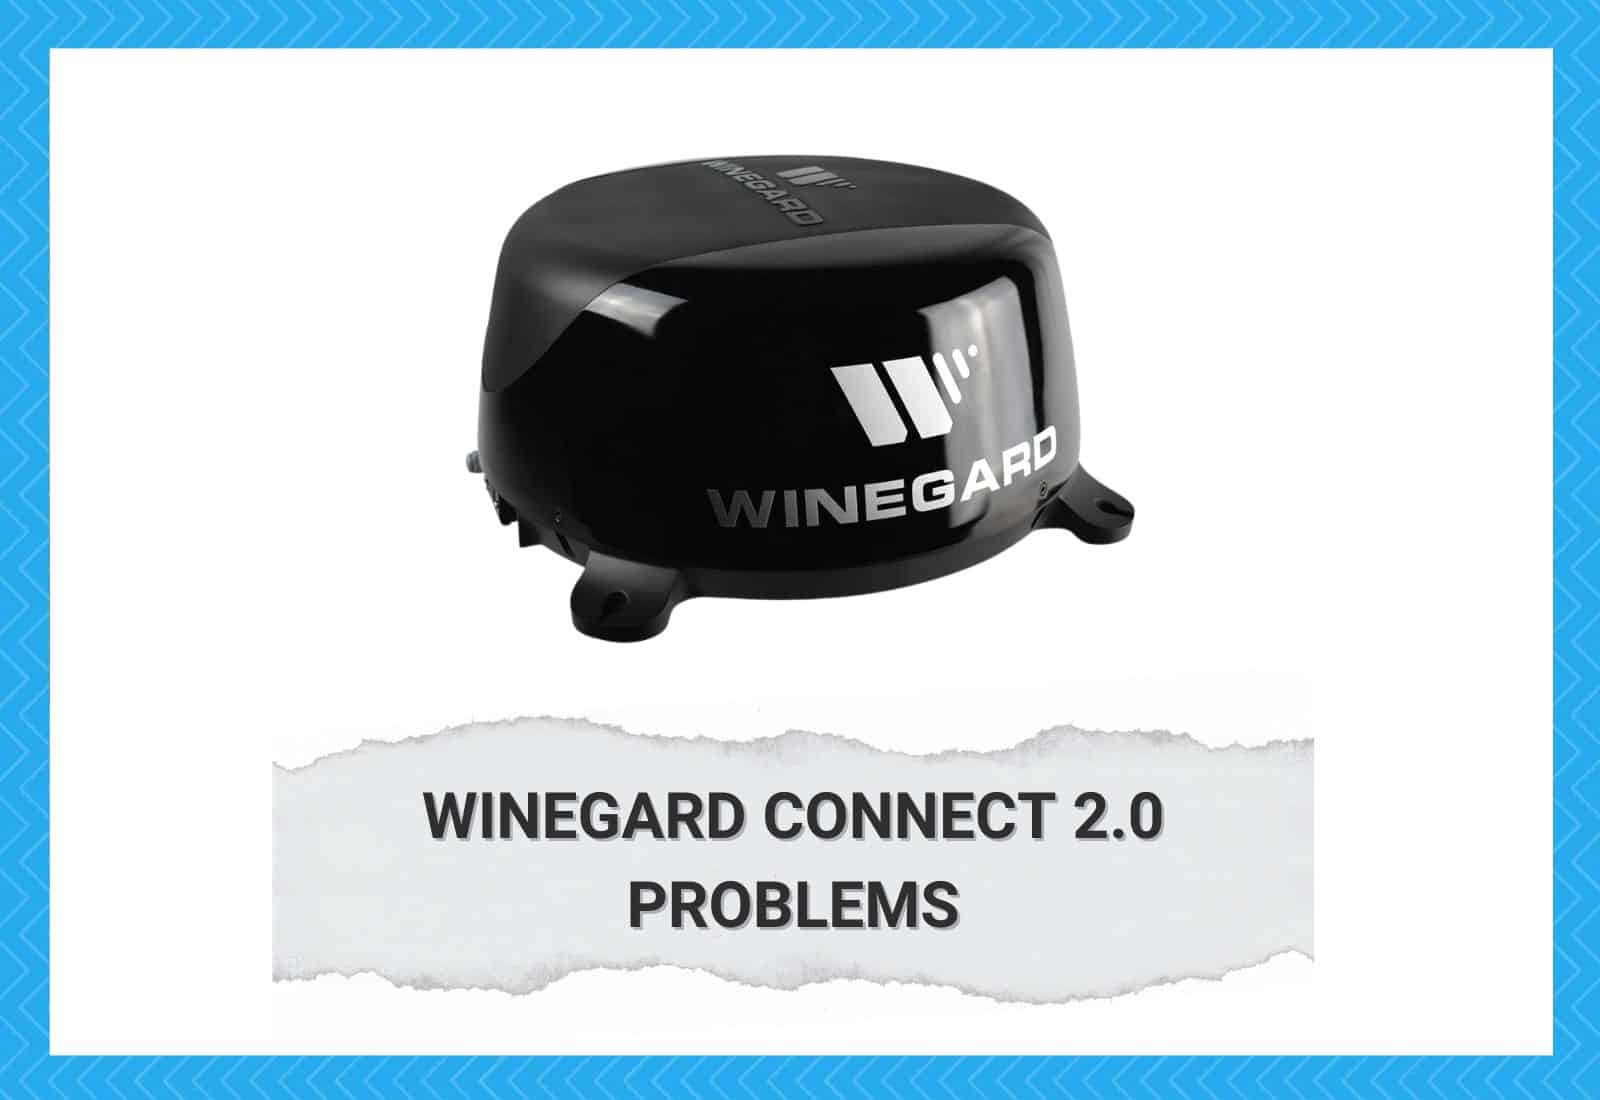 Winegard Connect 2.0 Problems